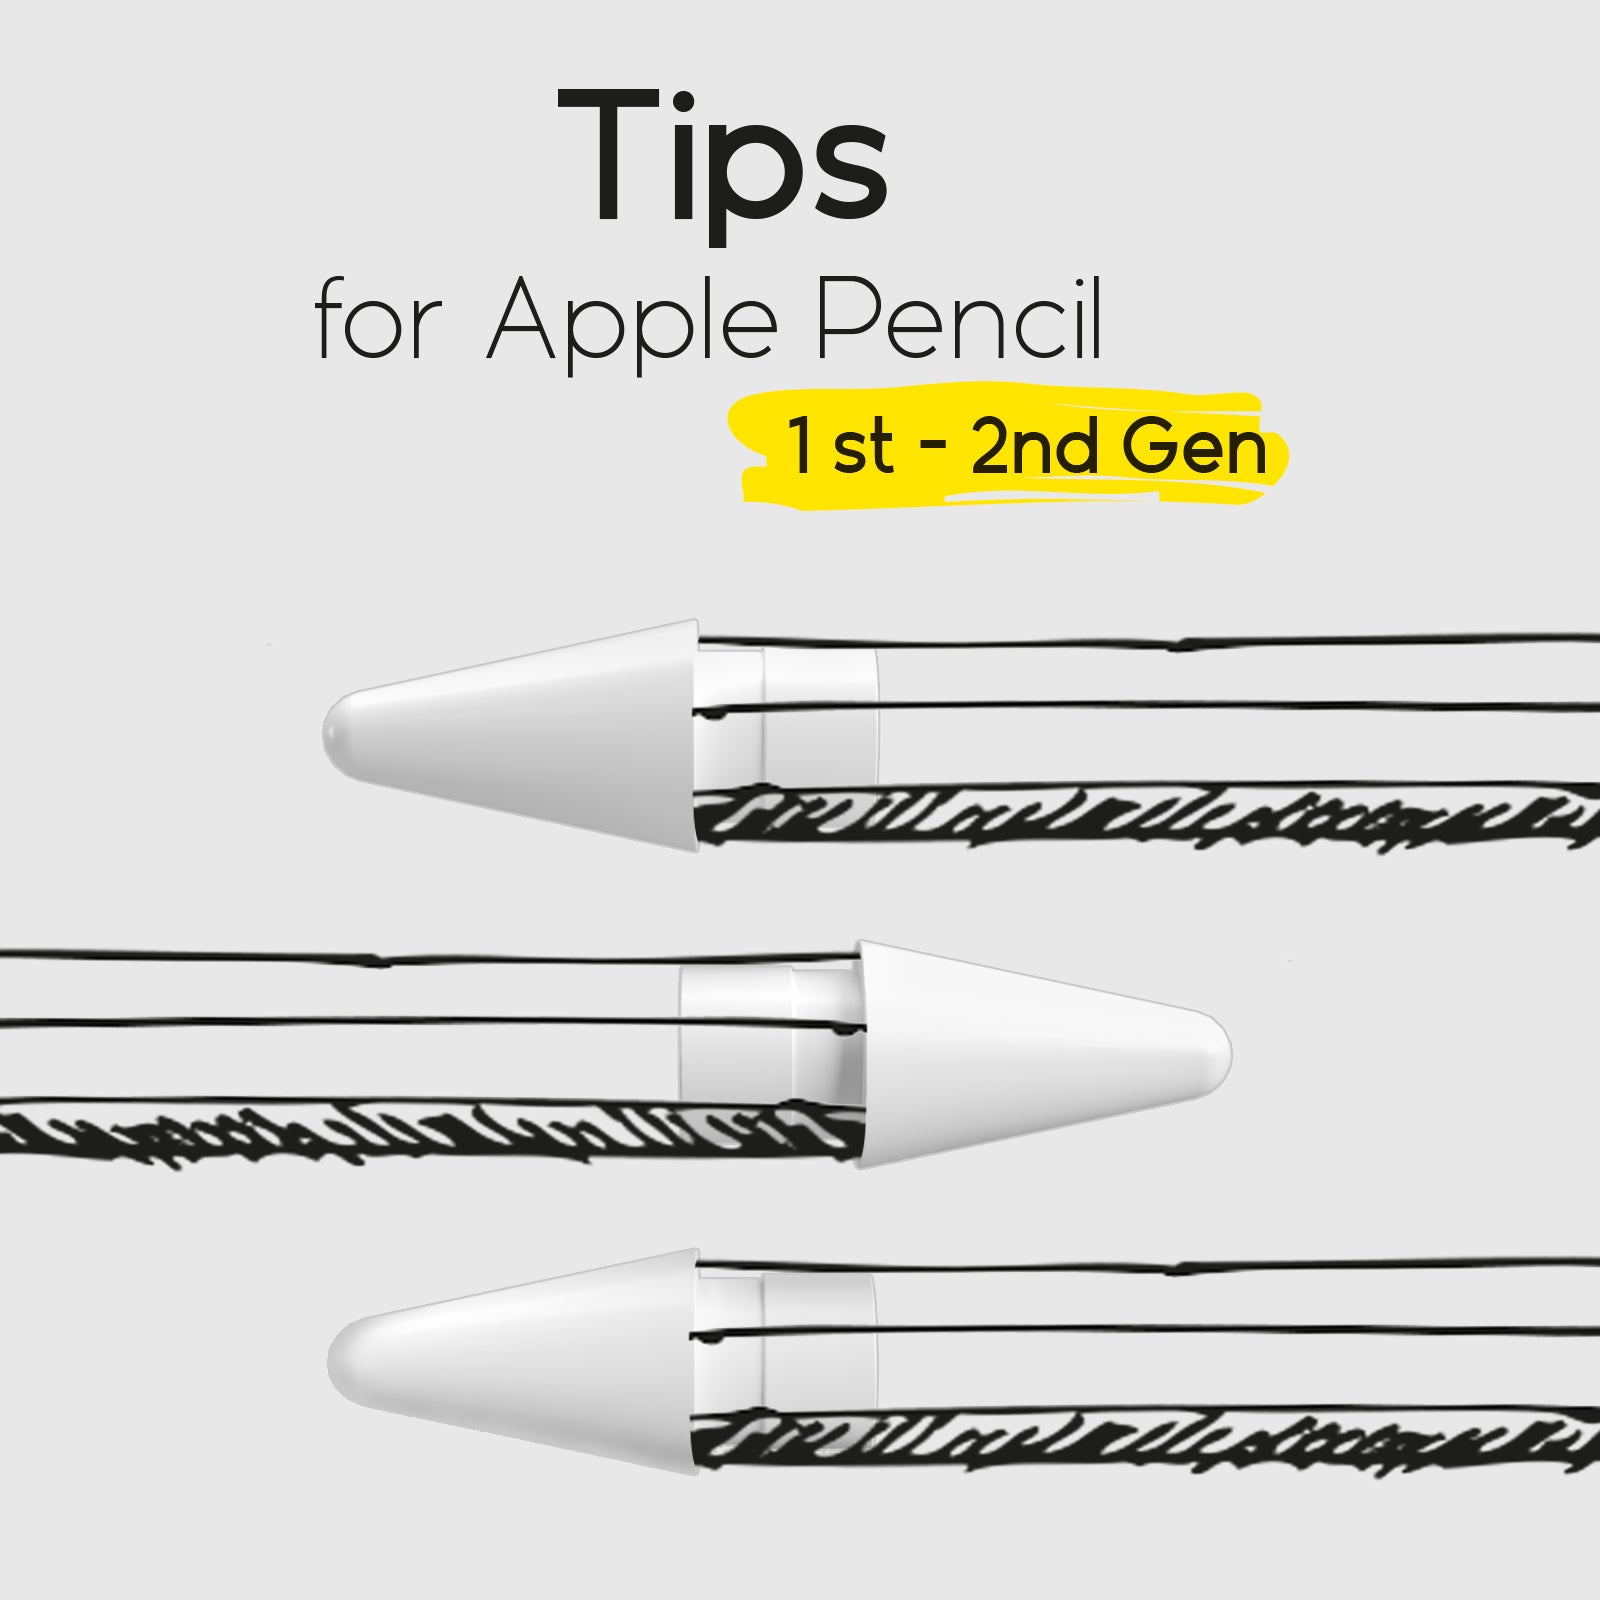 Replacement tips for Apple Pencil Pro/1st and 2nd generation Apple Pencils